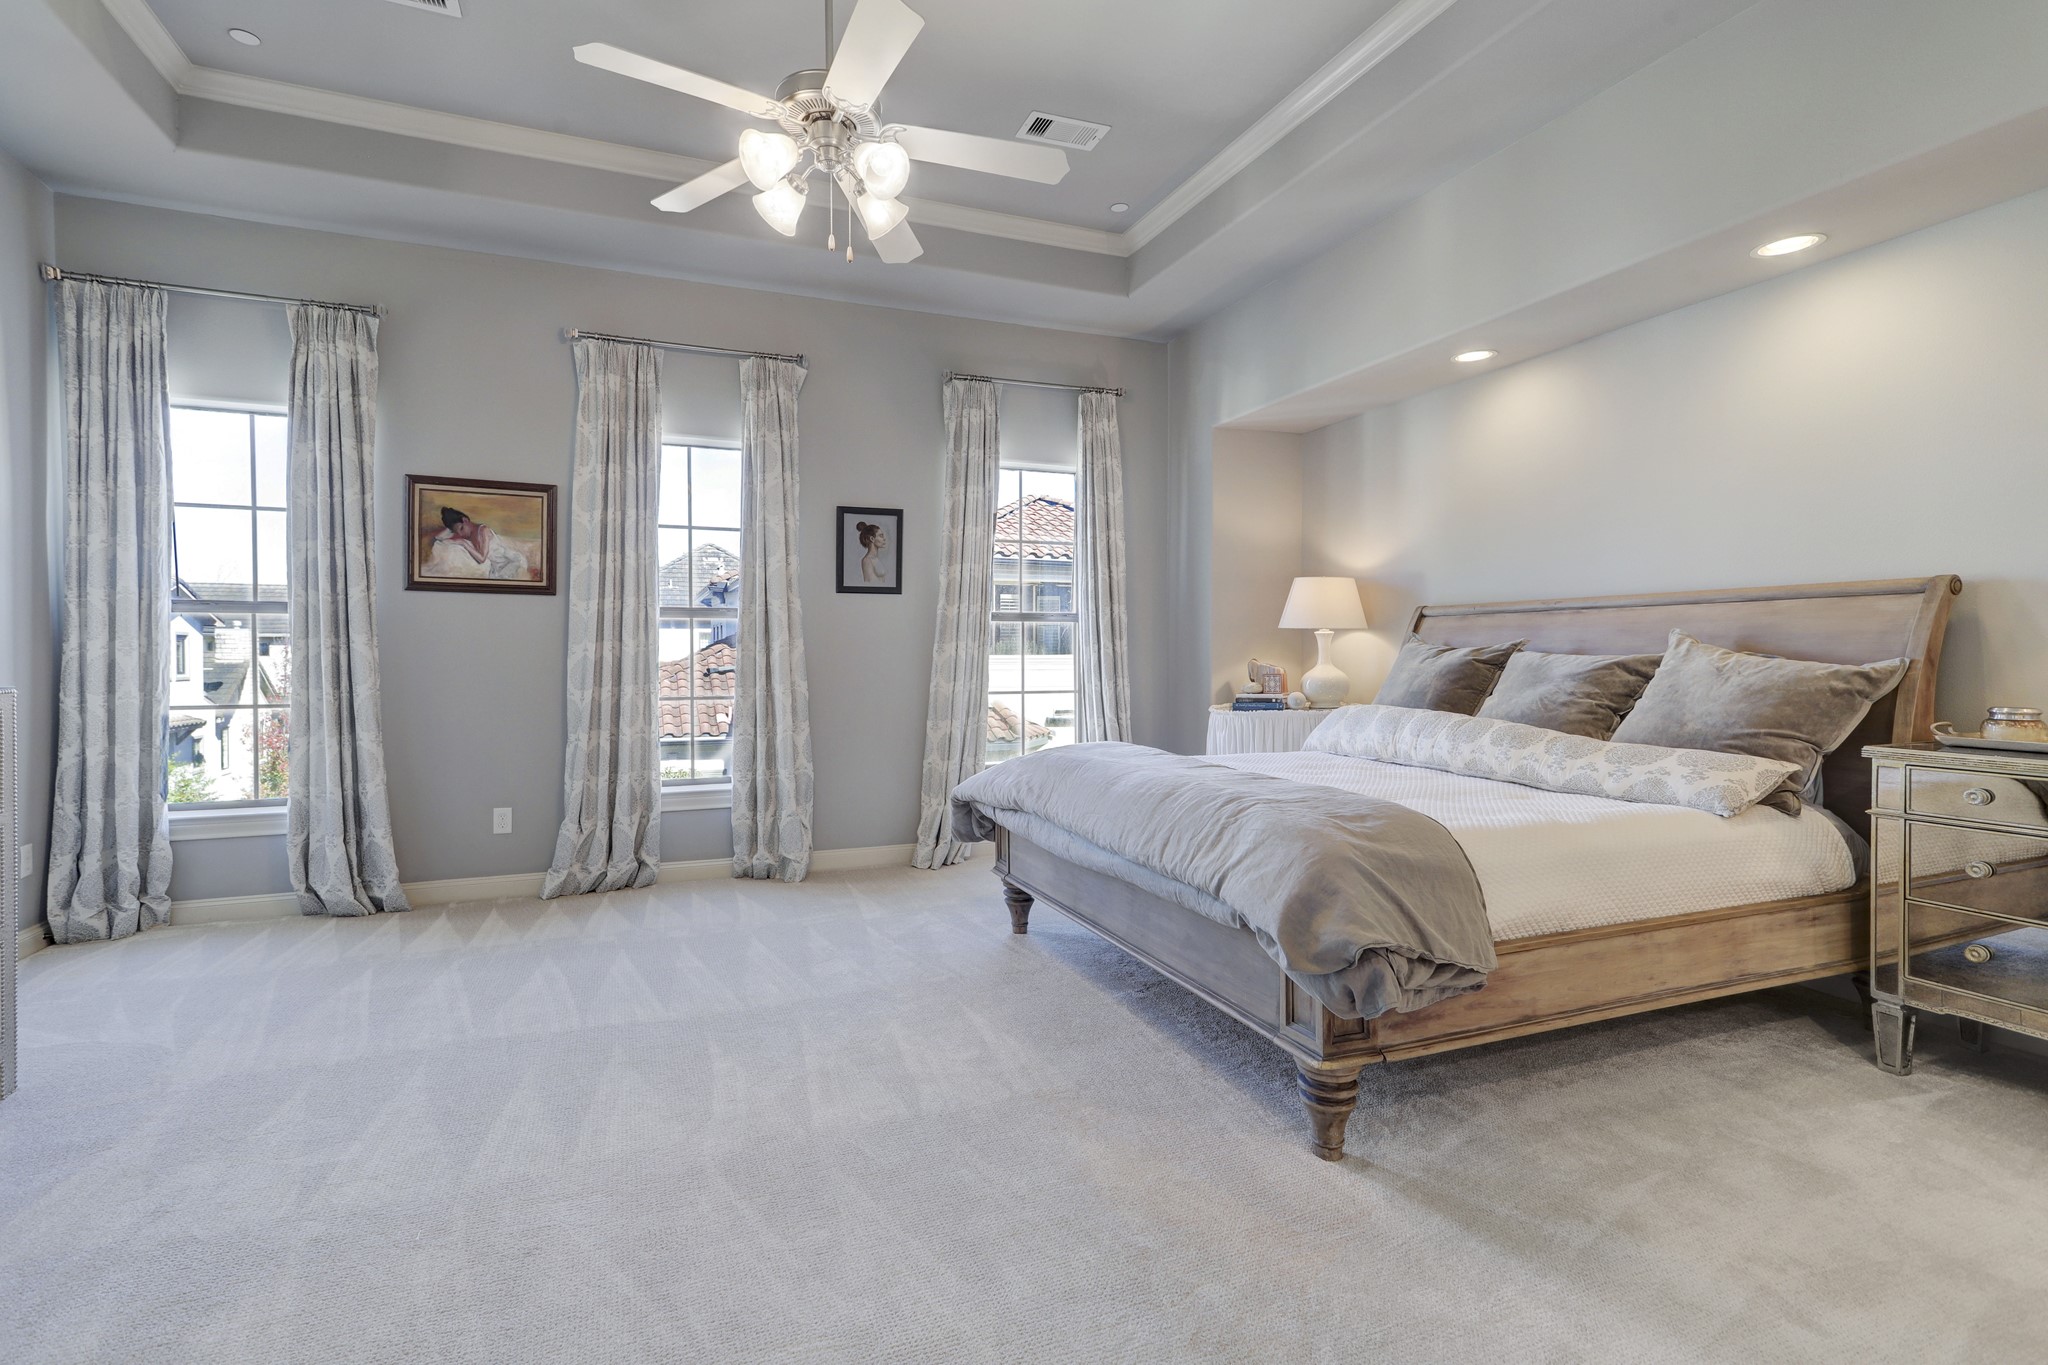 The primary bedroom features a tray ceiling, and an alcove bed wall with recessed lighting .